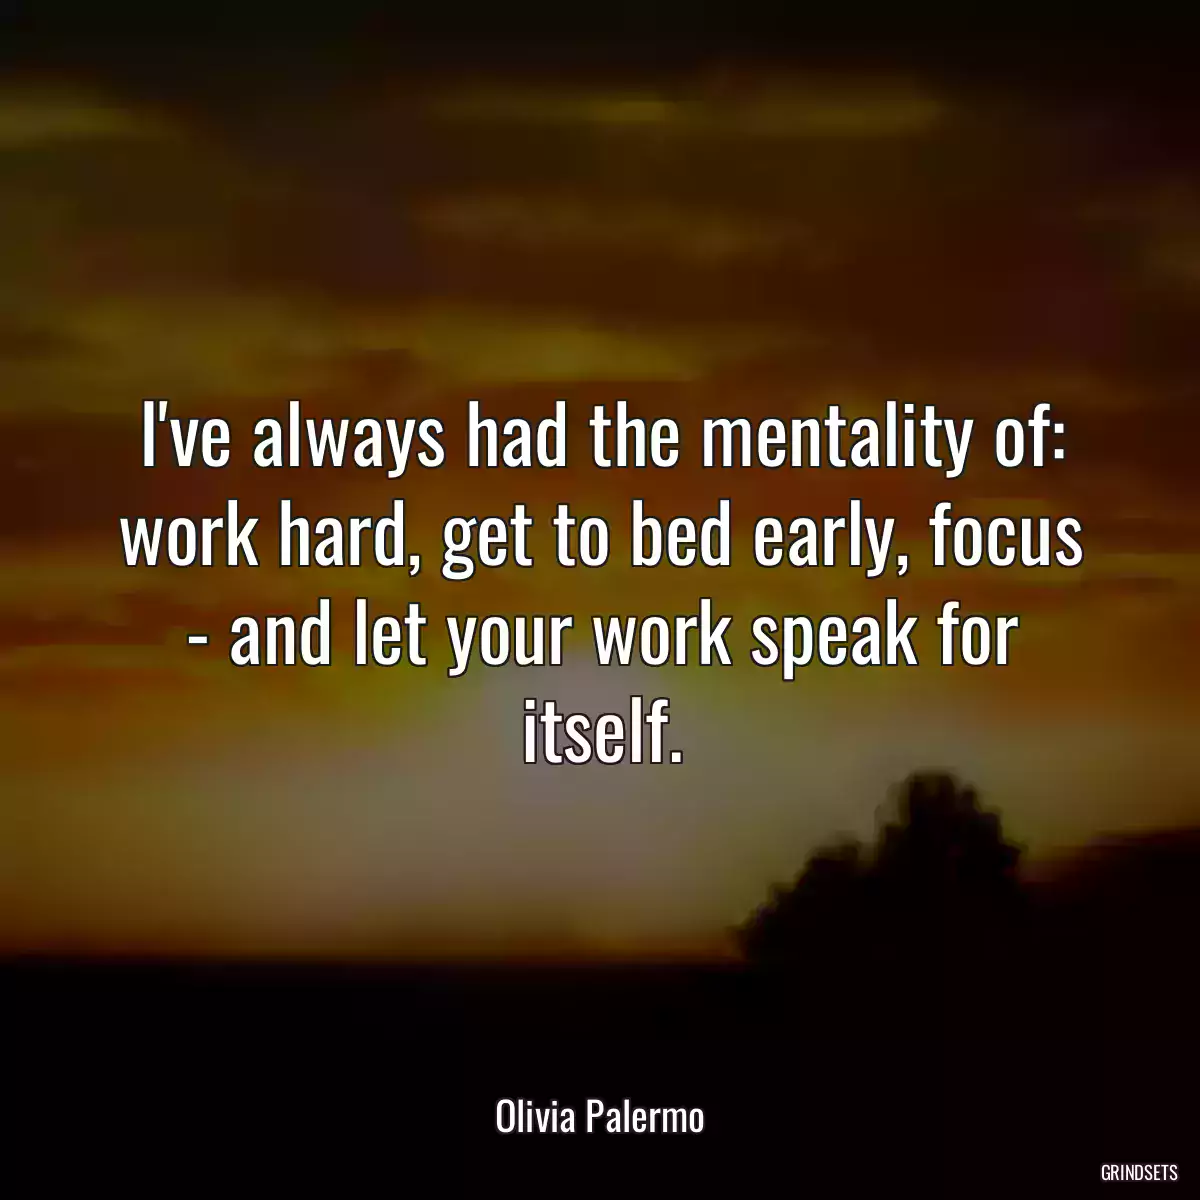 I\'ve always had the mentality of: work hard, get to bed early, focus - and let your work speak for itself.